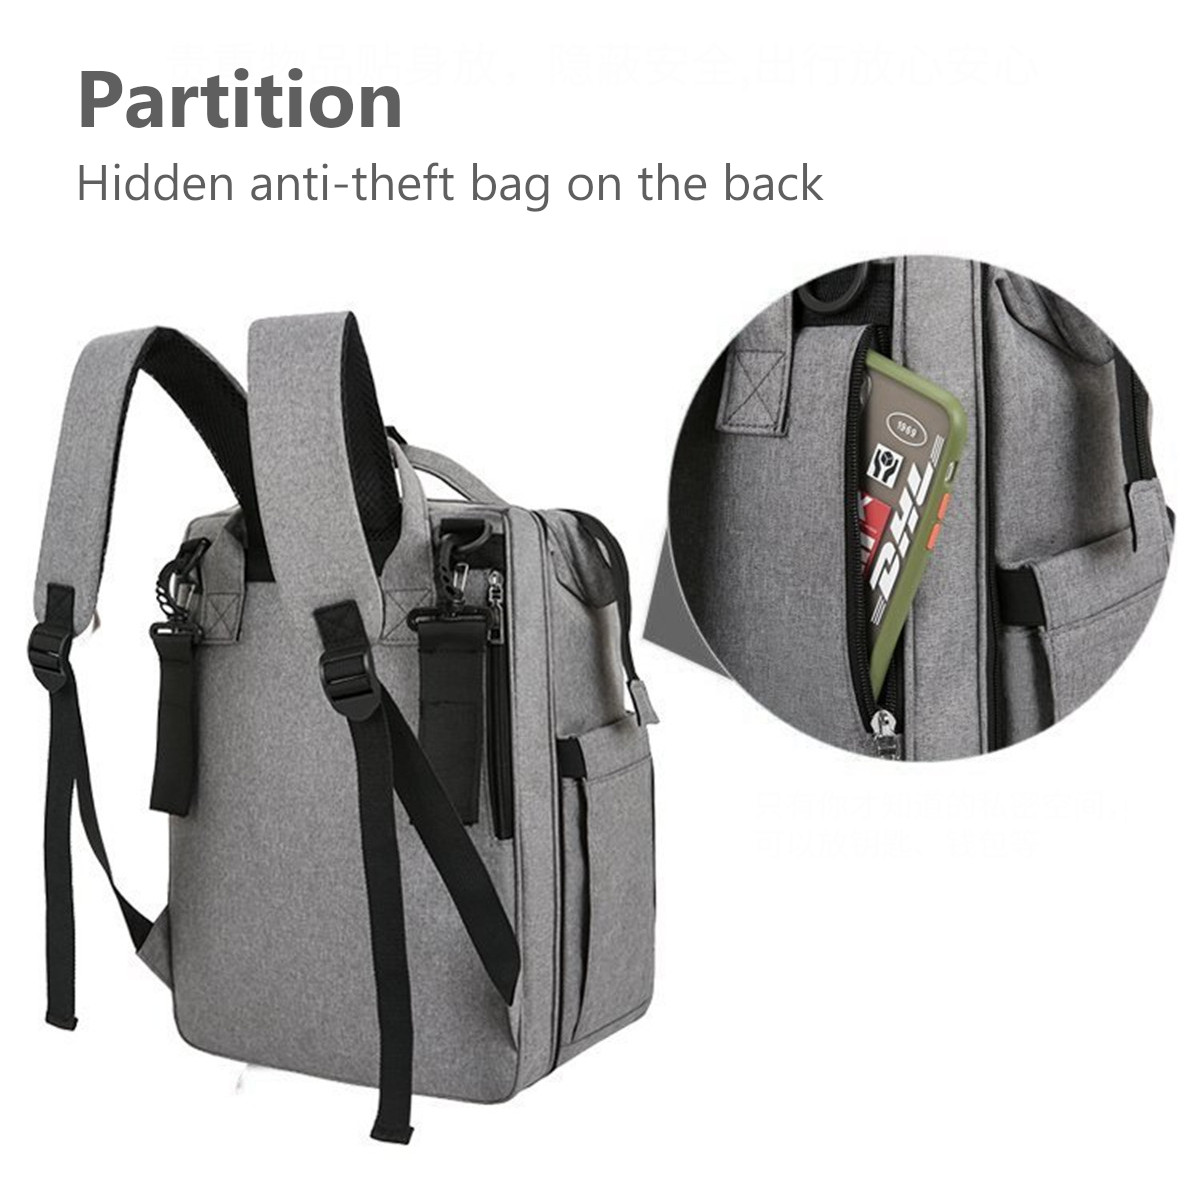 Multifunctional-Waterproof-Mummy-Bag-Portable-Diaper-Bag-Large-capacity-Folding-Bed-Bag-Out-of-bed-B-1916752-7